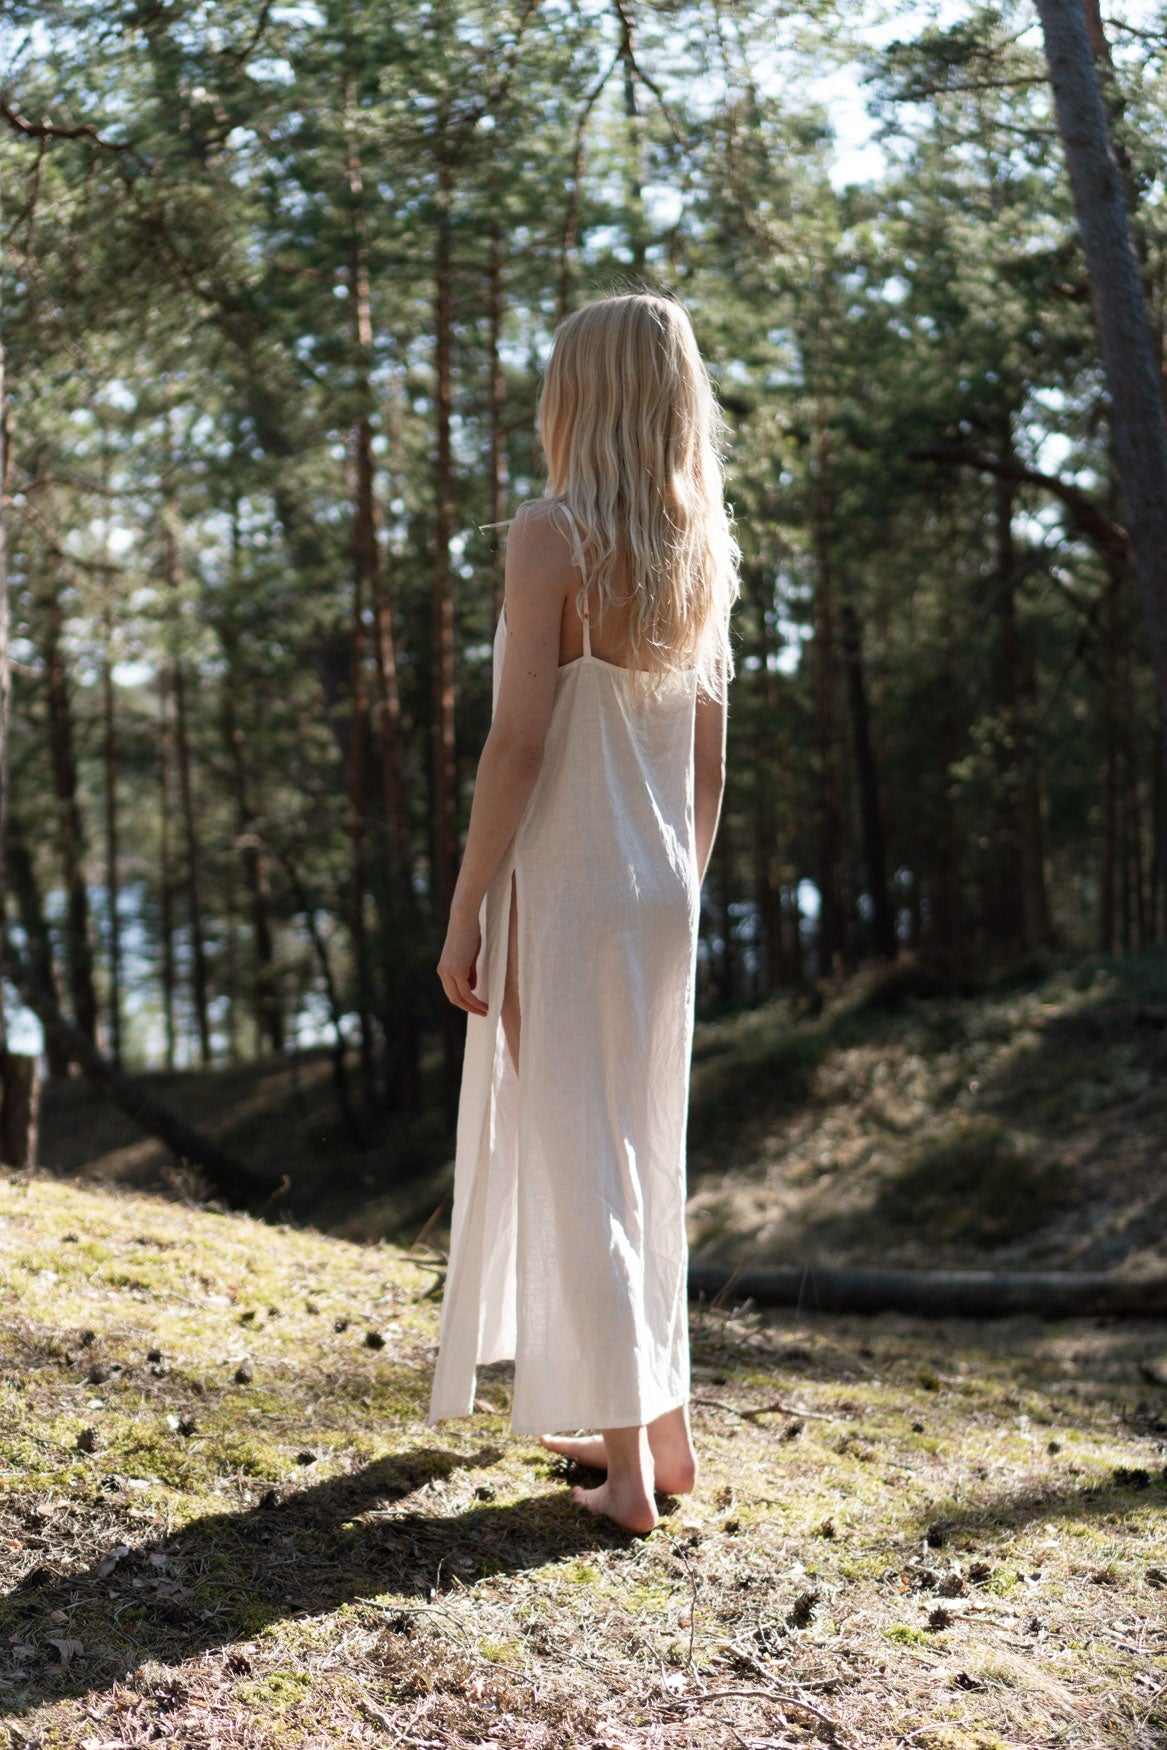 Organic, sustainable, sexy, long white linen nightwear slip dress with spaghetti straps and splits. This linen lingerie nightdress is natural, comfortable, soft and pure. This sleepwear nightgown is a conscious and healthy choice for your body and environment.